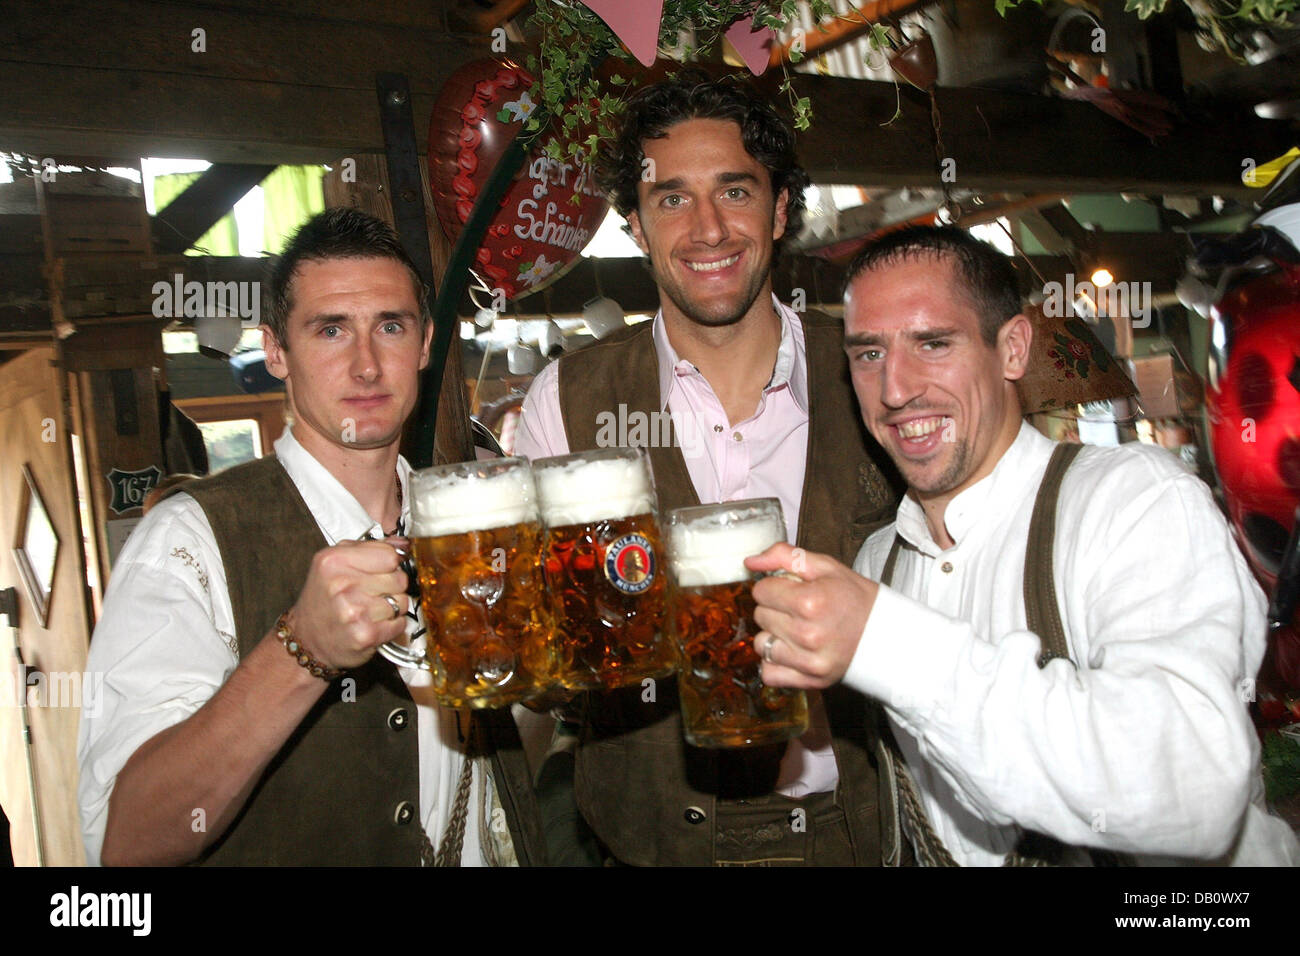 Bayern Munich players Miroslav Klose (L-R), Luca Toni (Italy) and Franck Ribery (France) clink their beer mugs during the Oktoberfest in Munich, Germany, 30 September 2007. The 174th Oktoberfest, the biggest fair of the world, is expected to attract around six million visitors until its closing day on 07 October 2007. Photo: Johannes Simon Stock Photo